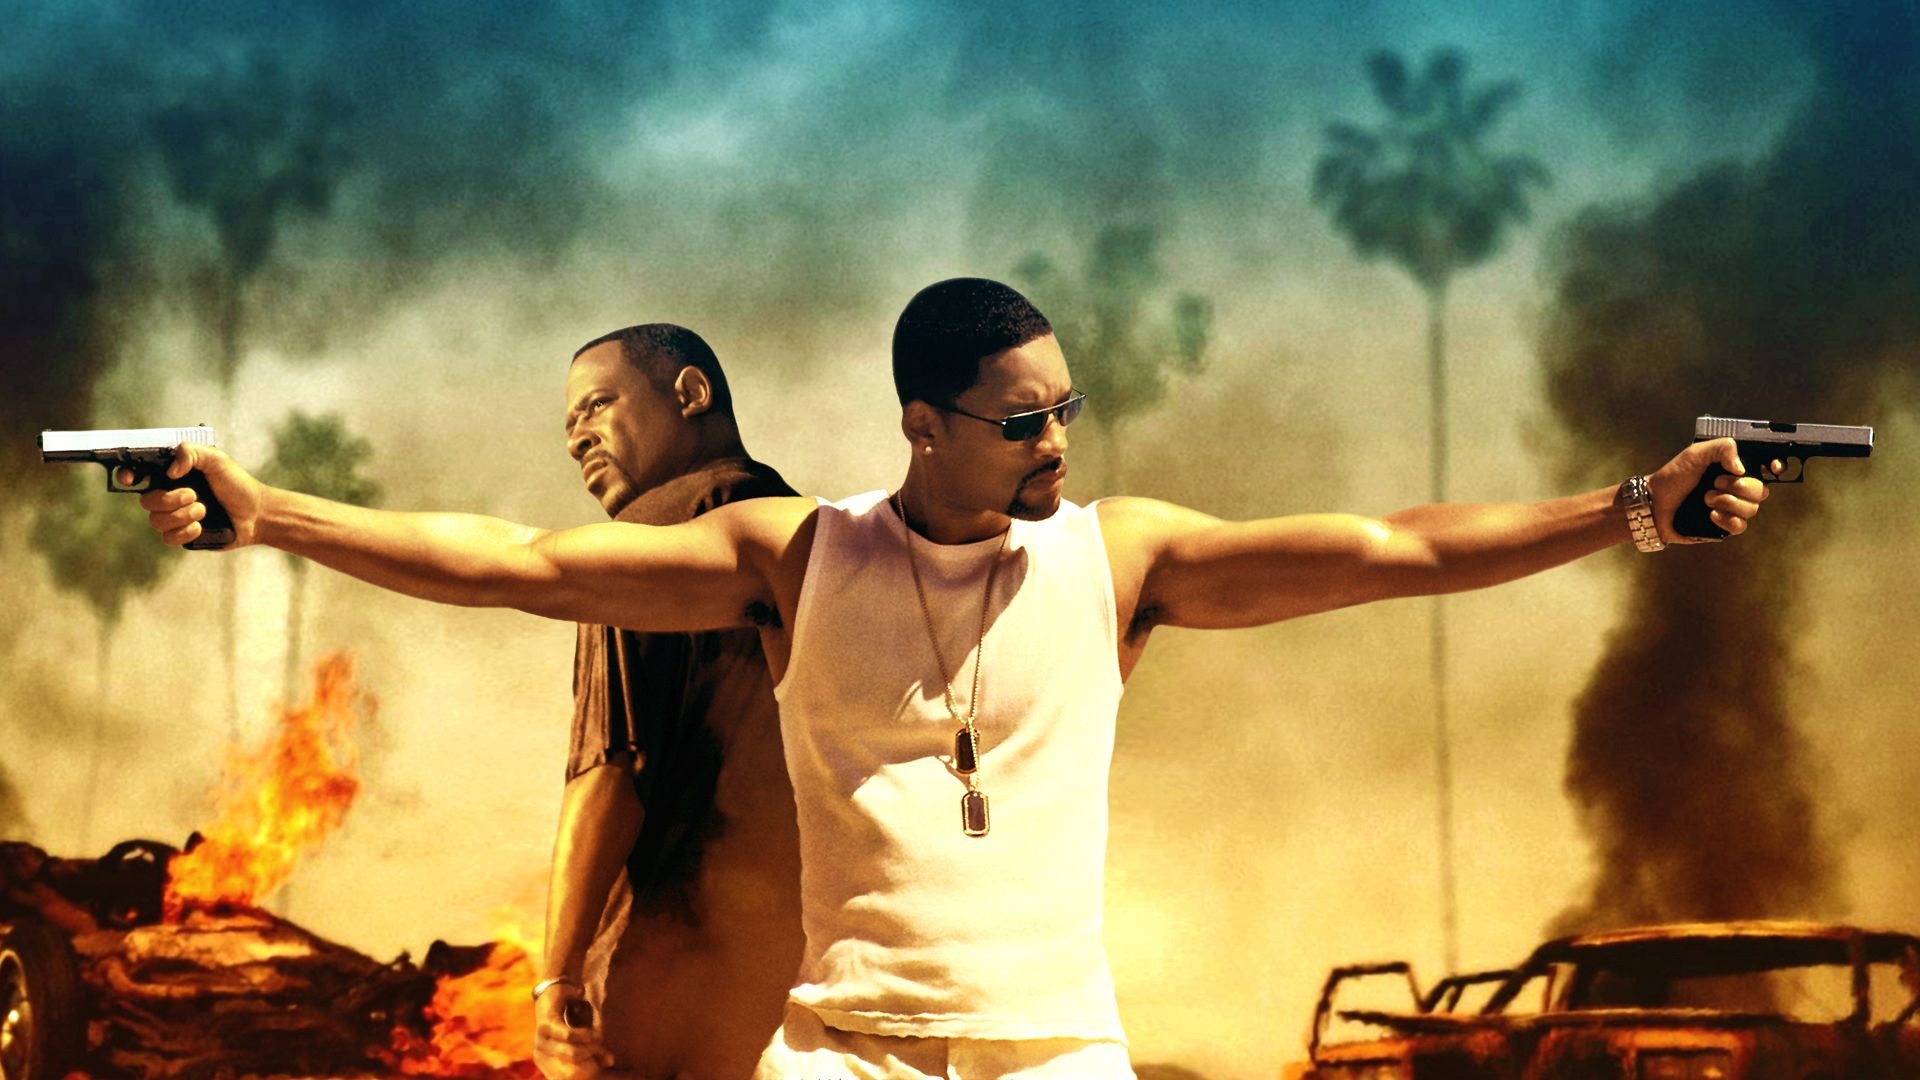 Bad Boys wallpapers, Stylish visuals, Captivating moments, Iconic duos, 1920x1080 Full HD Desktop